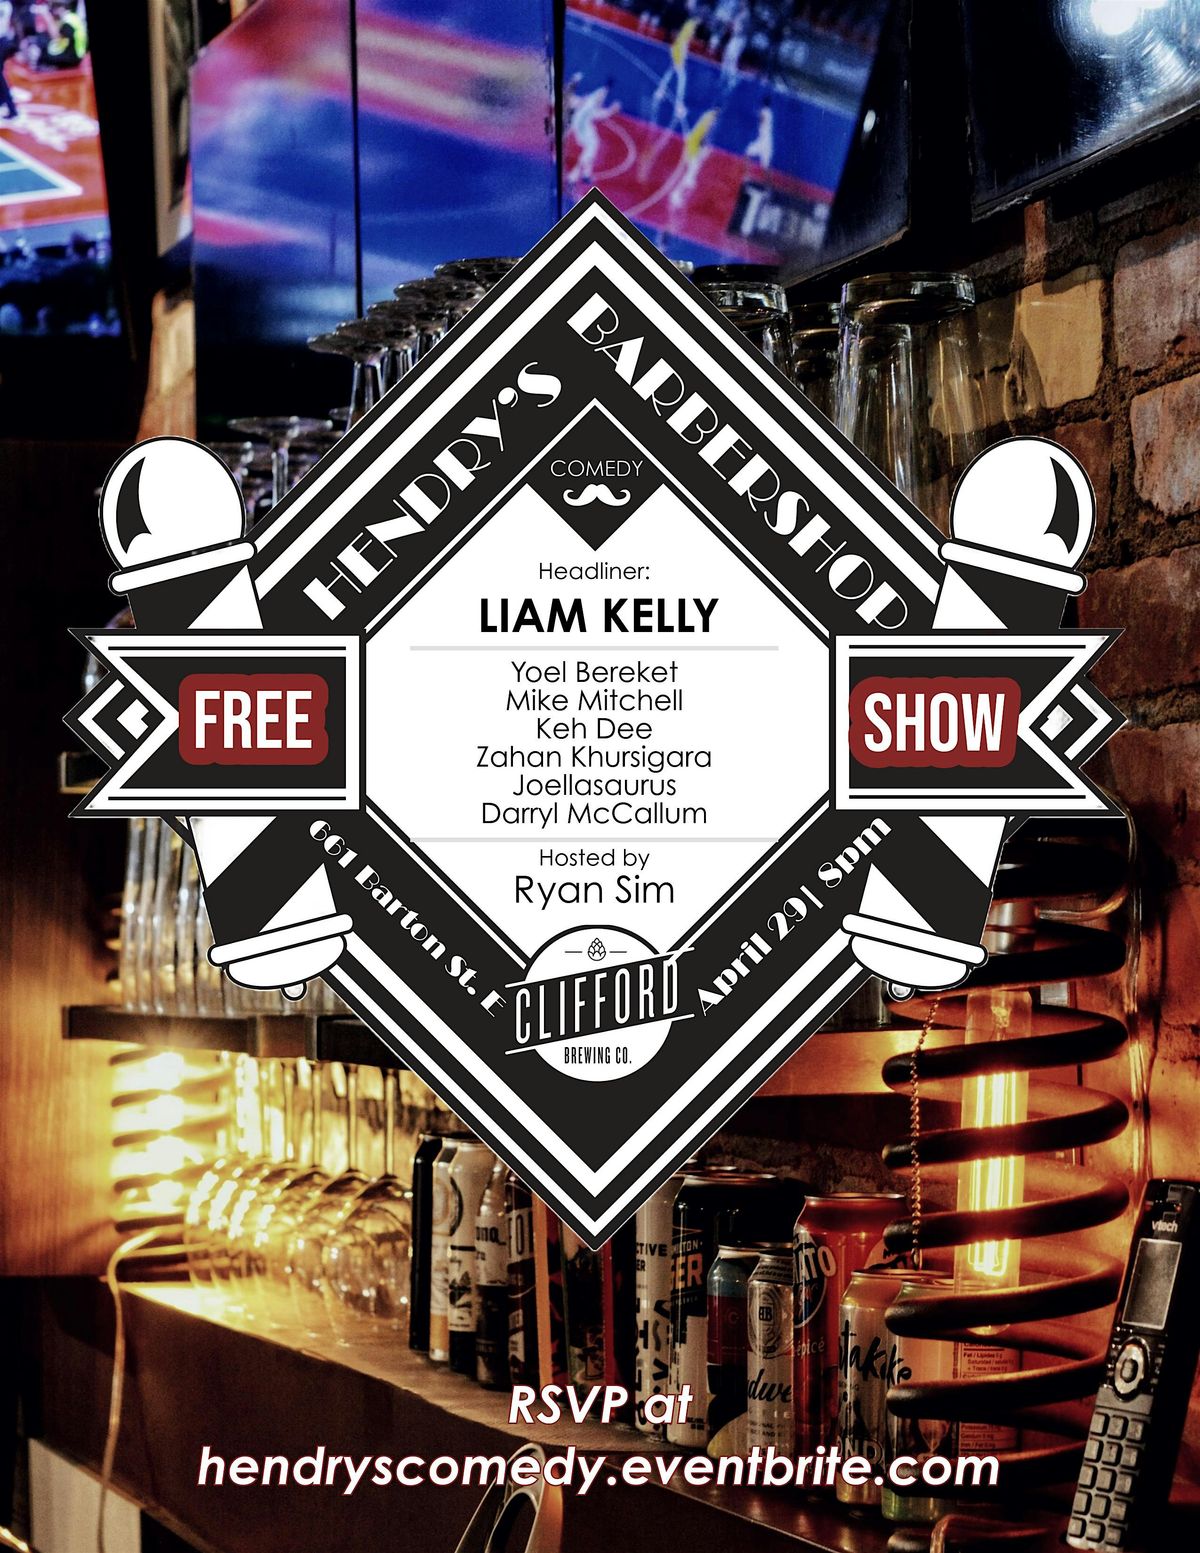 Comedy at Hendry's - Laughs at the Barbershop with Liam Kelly!!